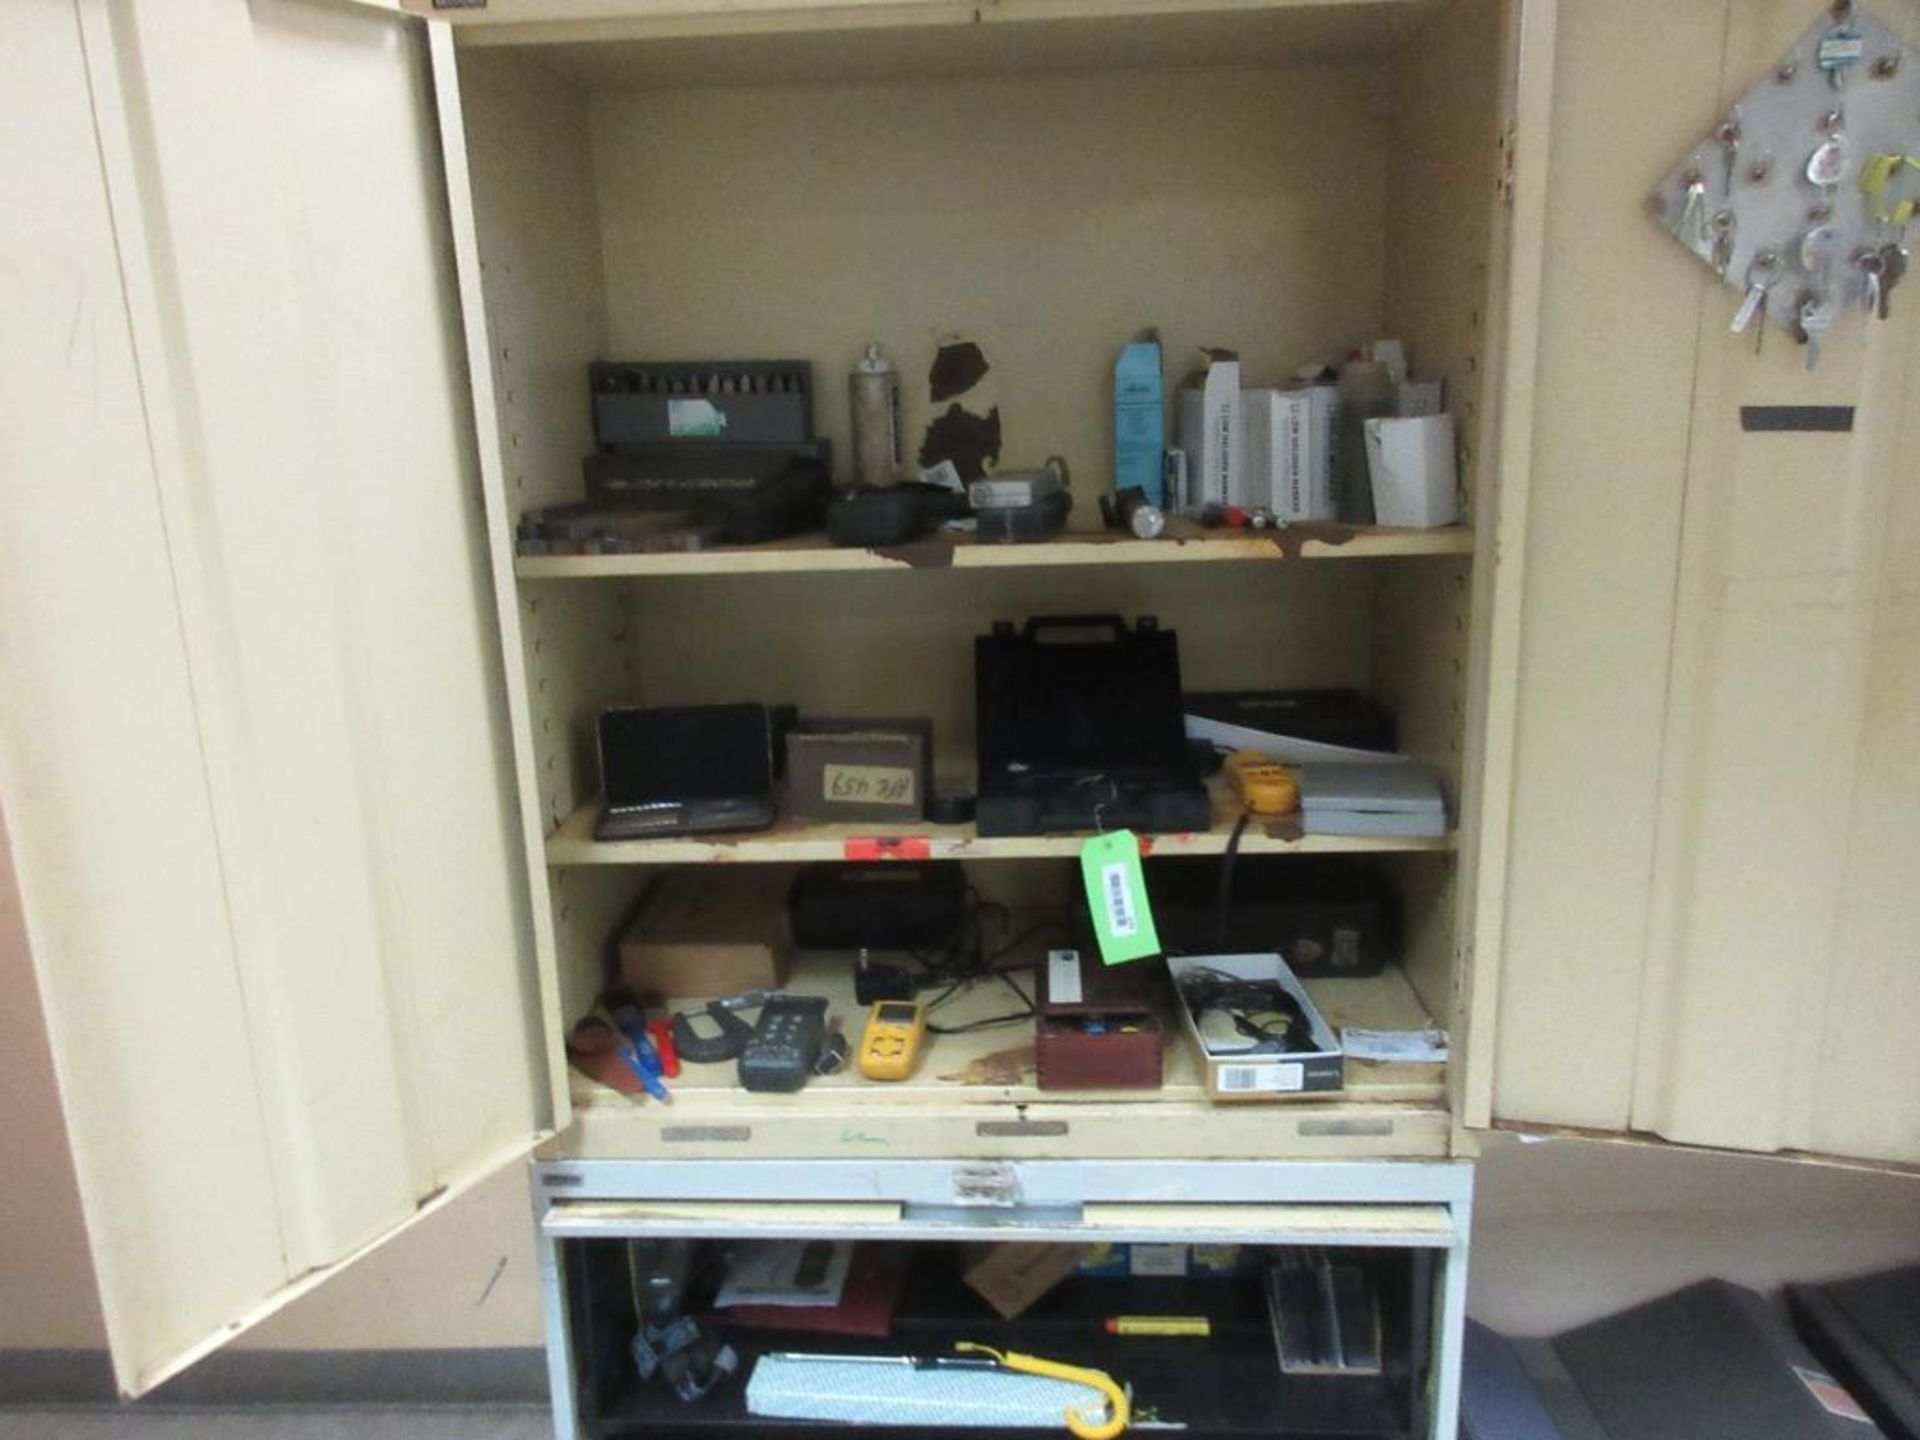 CONTENTS OF 3 CABINETS IN WORK AREA, TEST AND MEASUREMENT EQUIPMENT, METERS, TOOLS, ETC (OFFICES) - Image 10 of 18